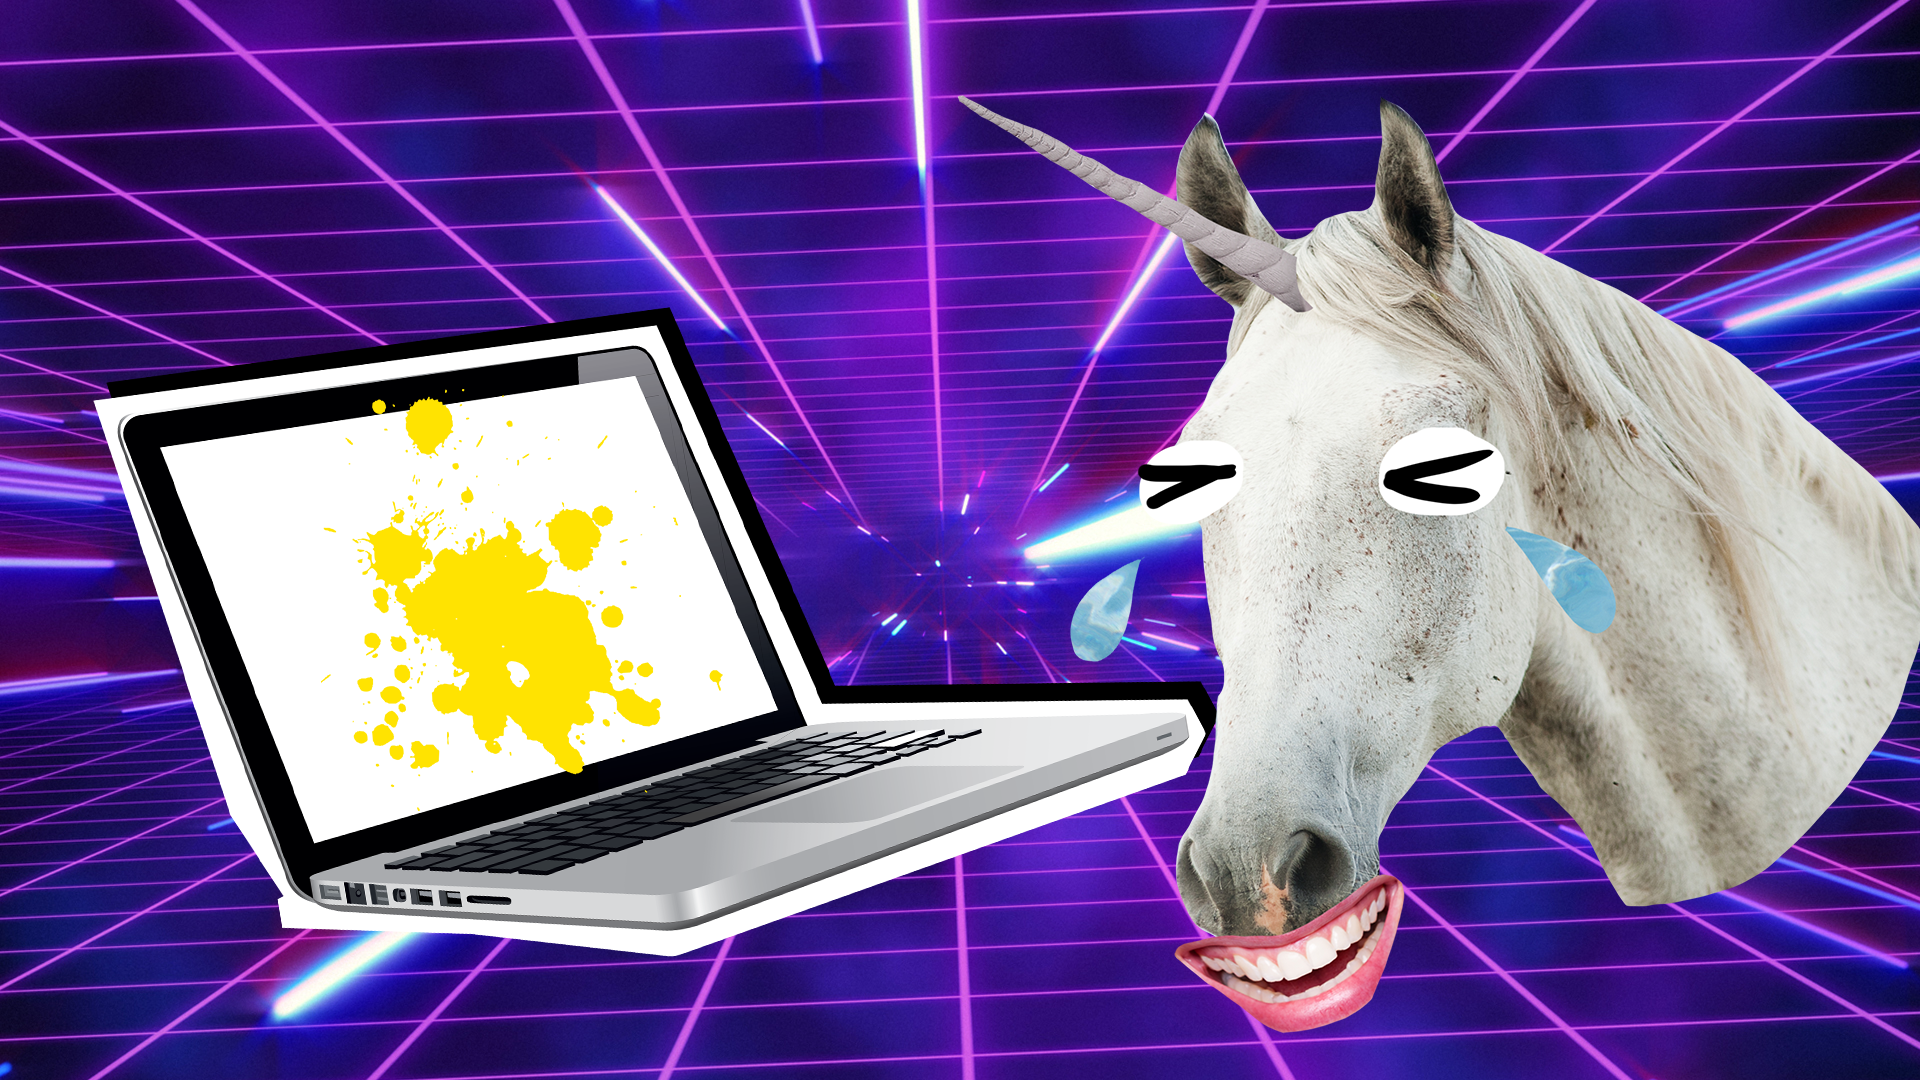 Cry laughing unicorn and a laptop